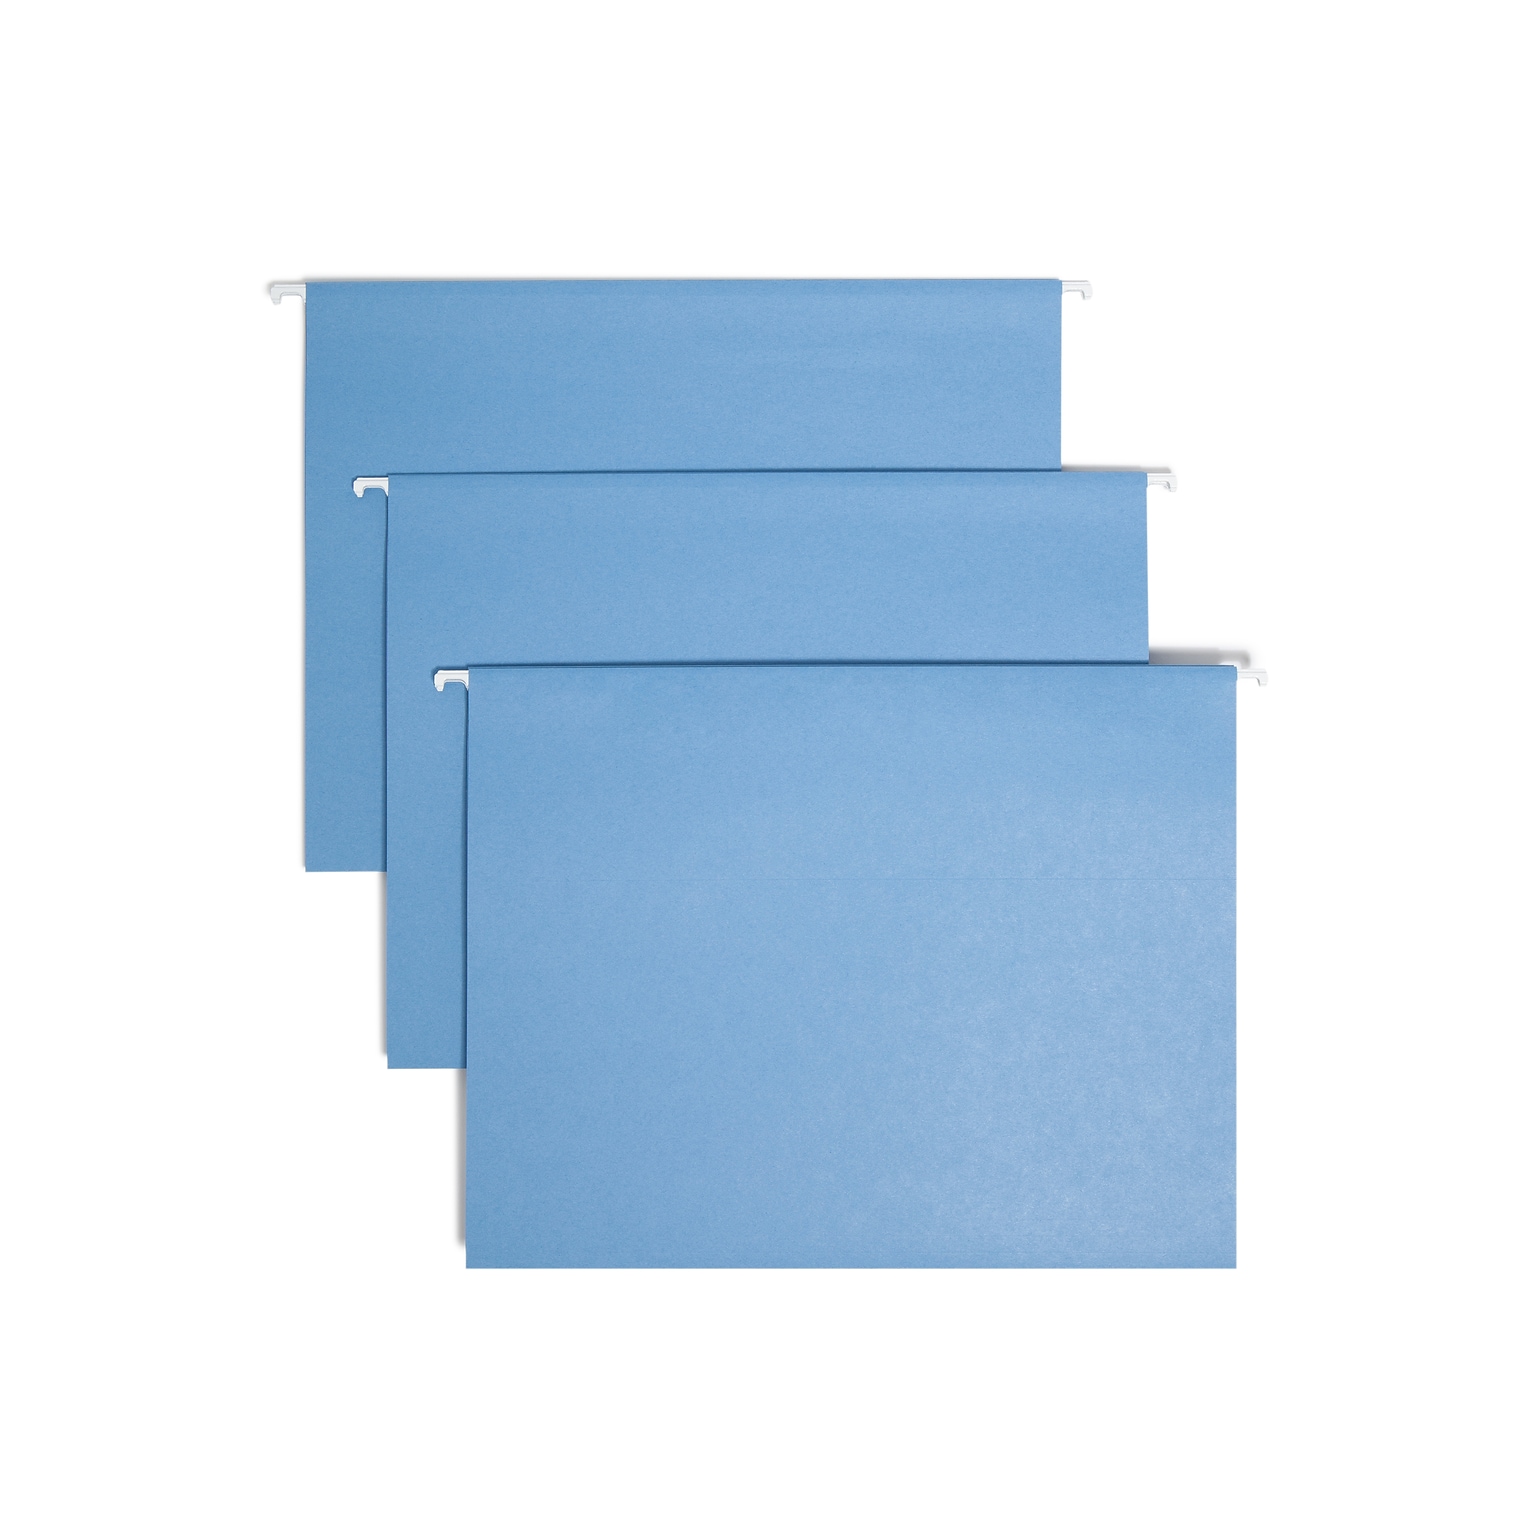 Smead TUFF Recycled Hanging File Folder, 3-Tab Tab, Letter Size, Blue, 18/Box (64041)